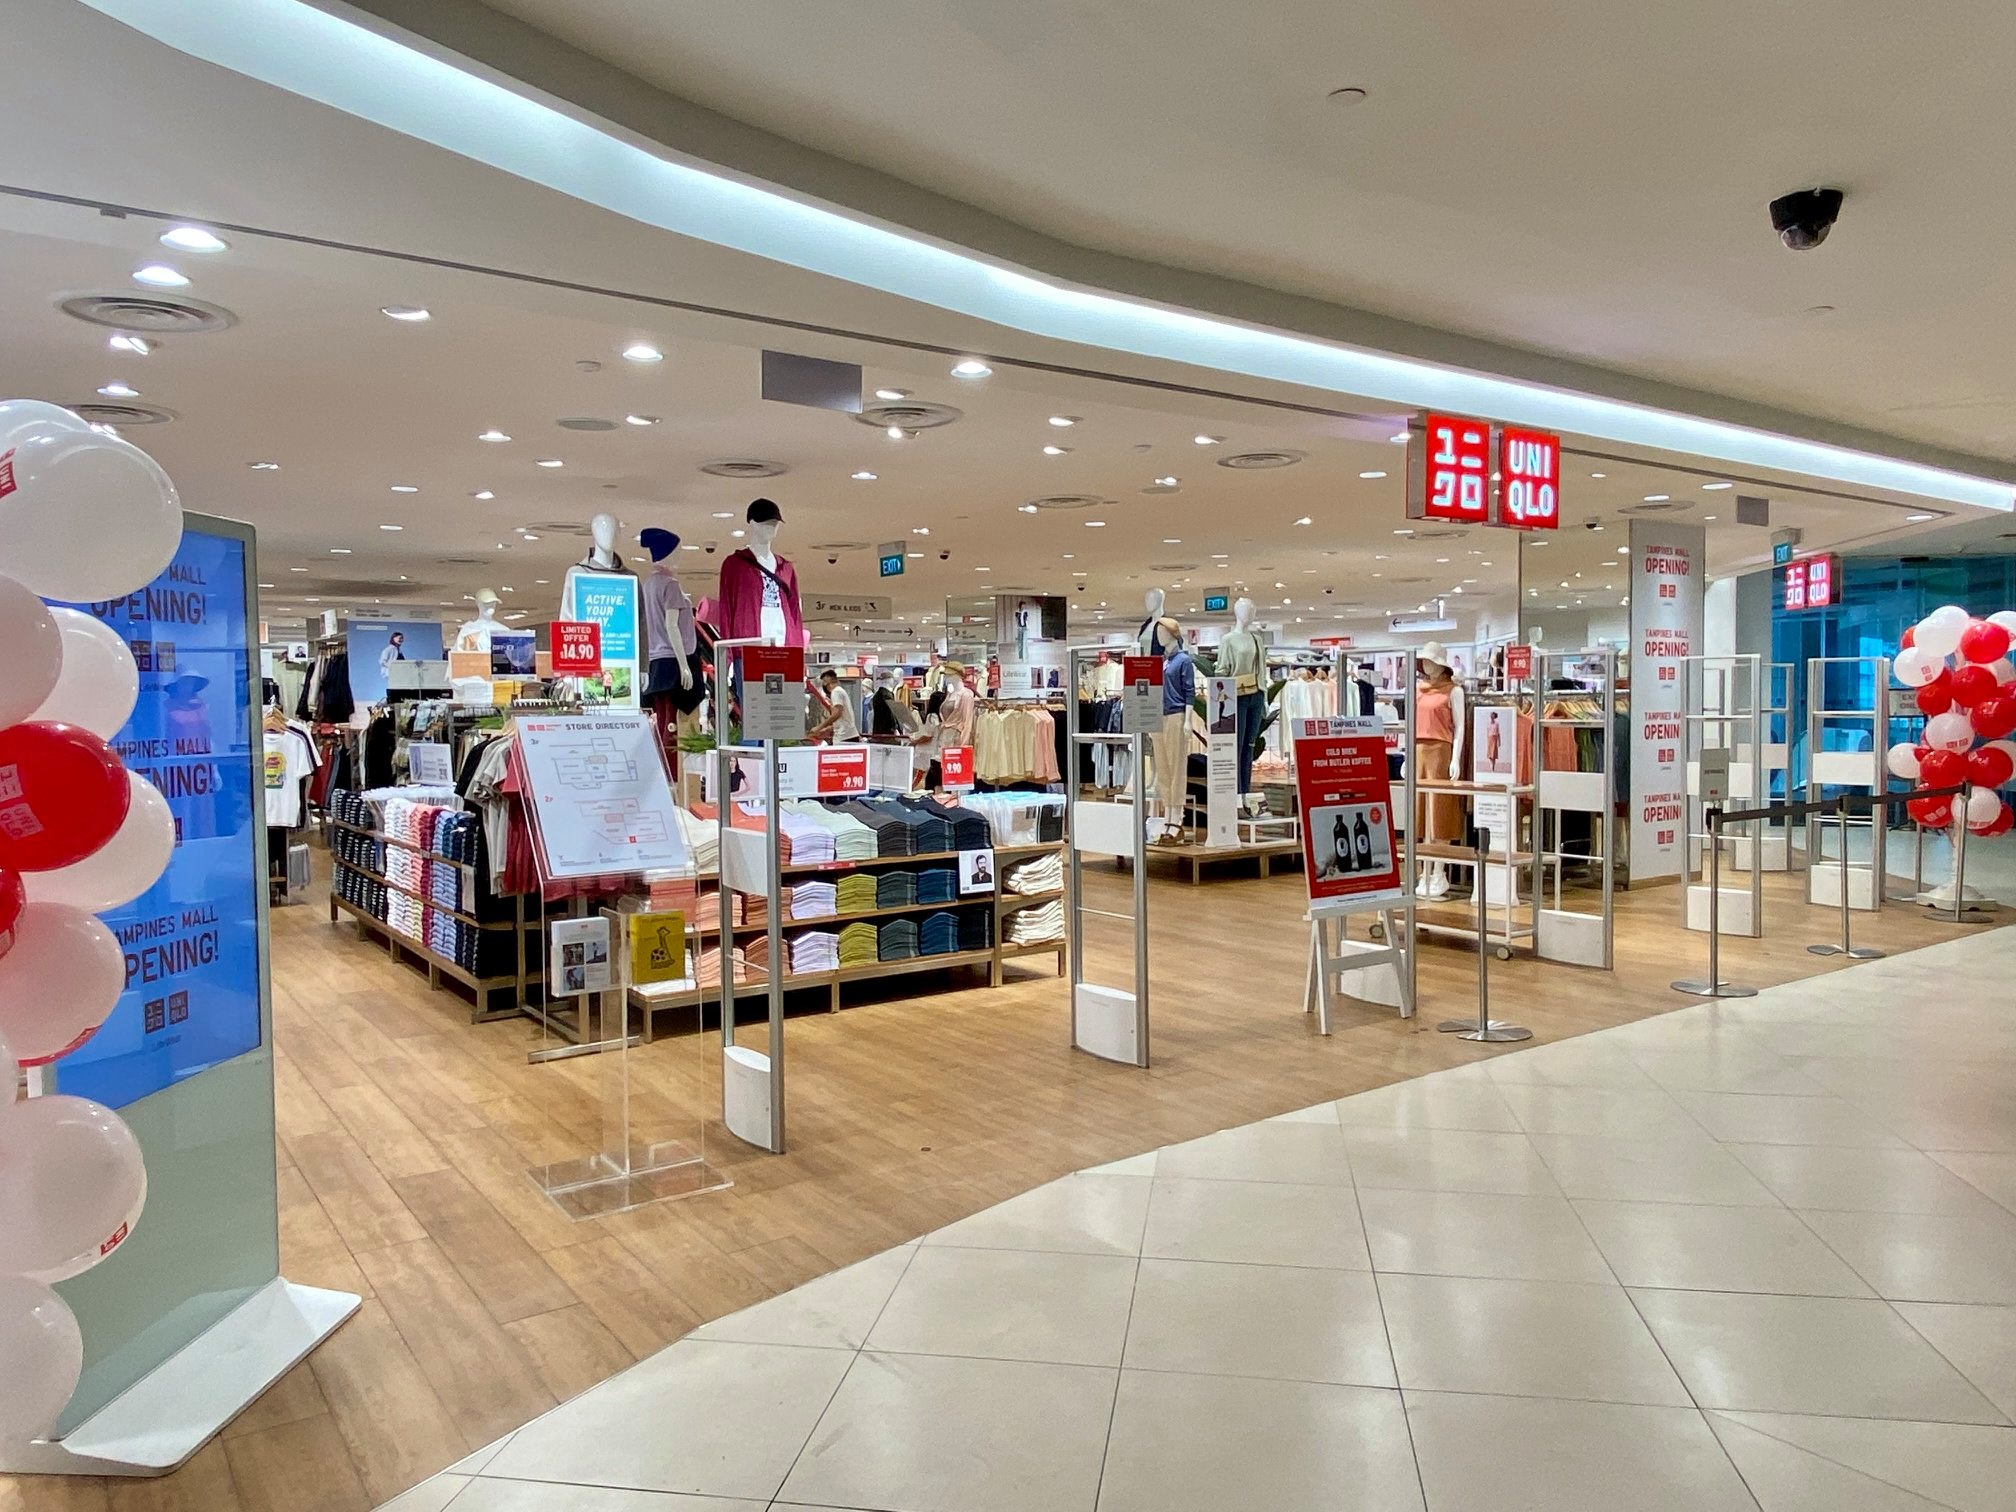 Uniqlo Tampines Mall Opens On 5 Feb, Has 2 Floors So There's More Space ...